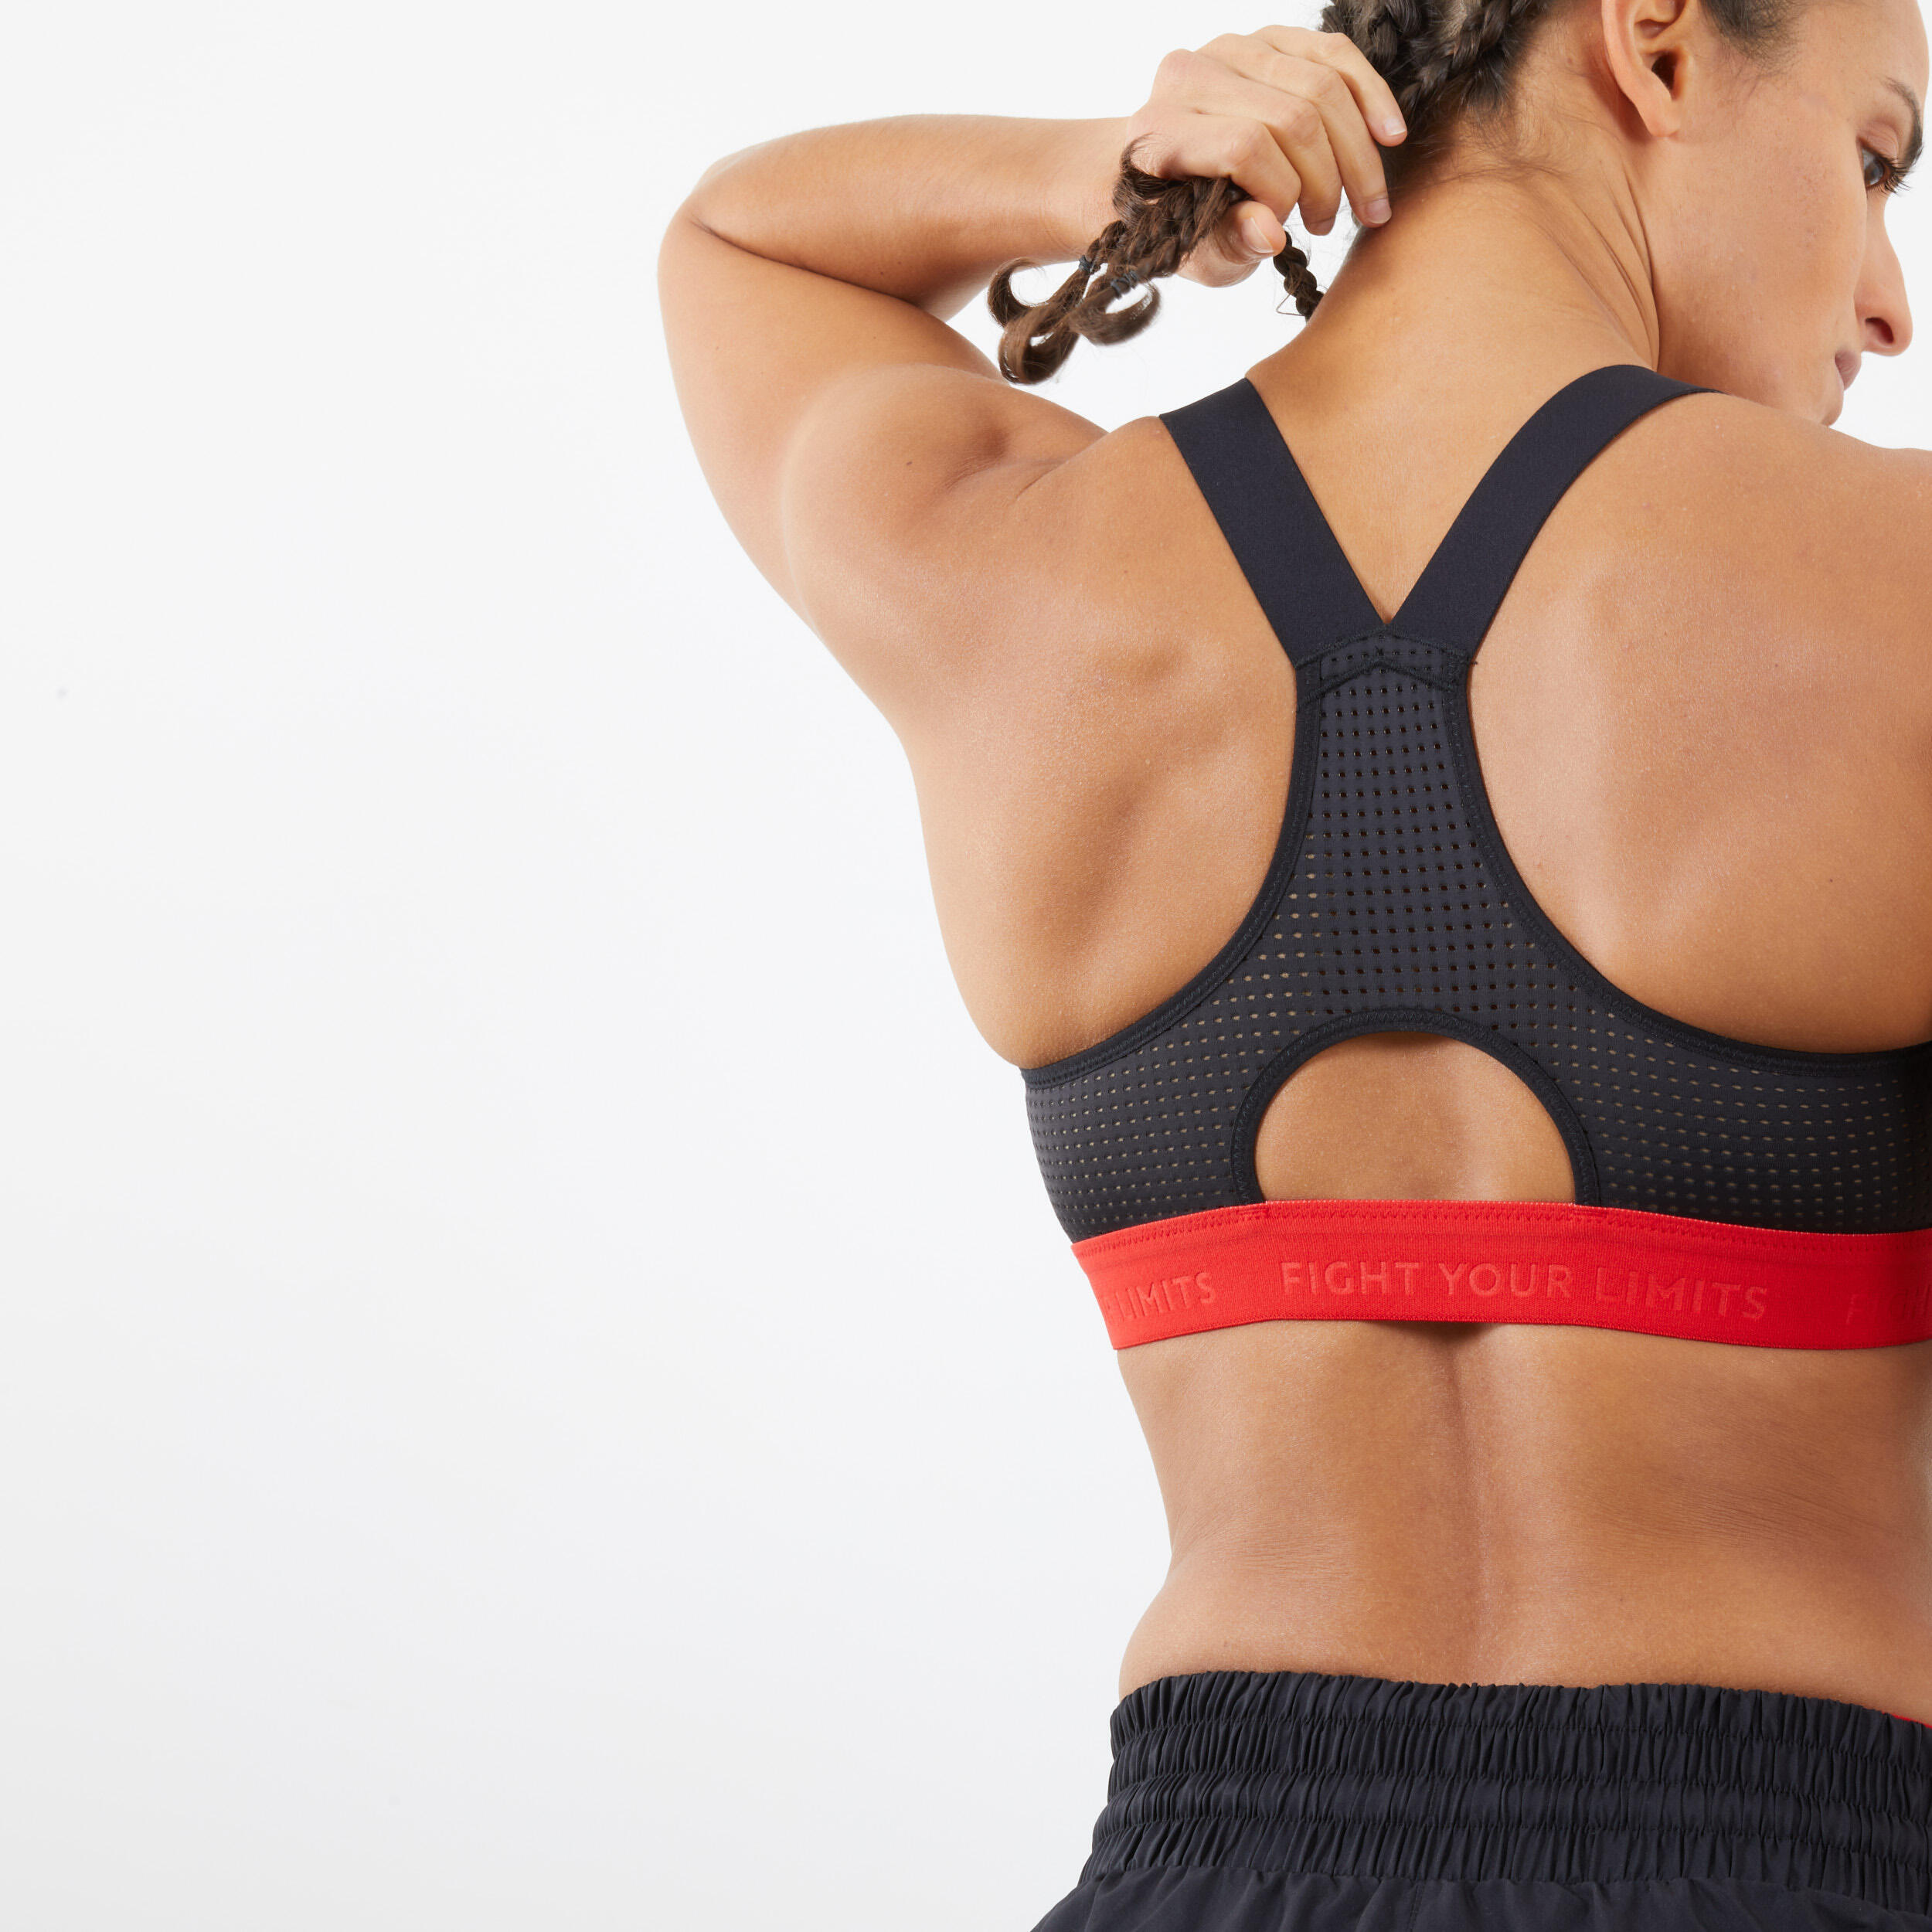 Boxing 2-In-1 Sports Bra: Support and Protection 6/6